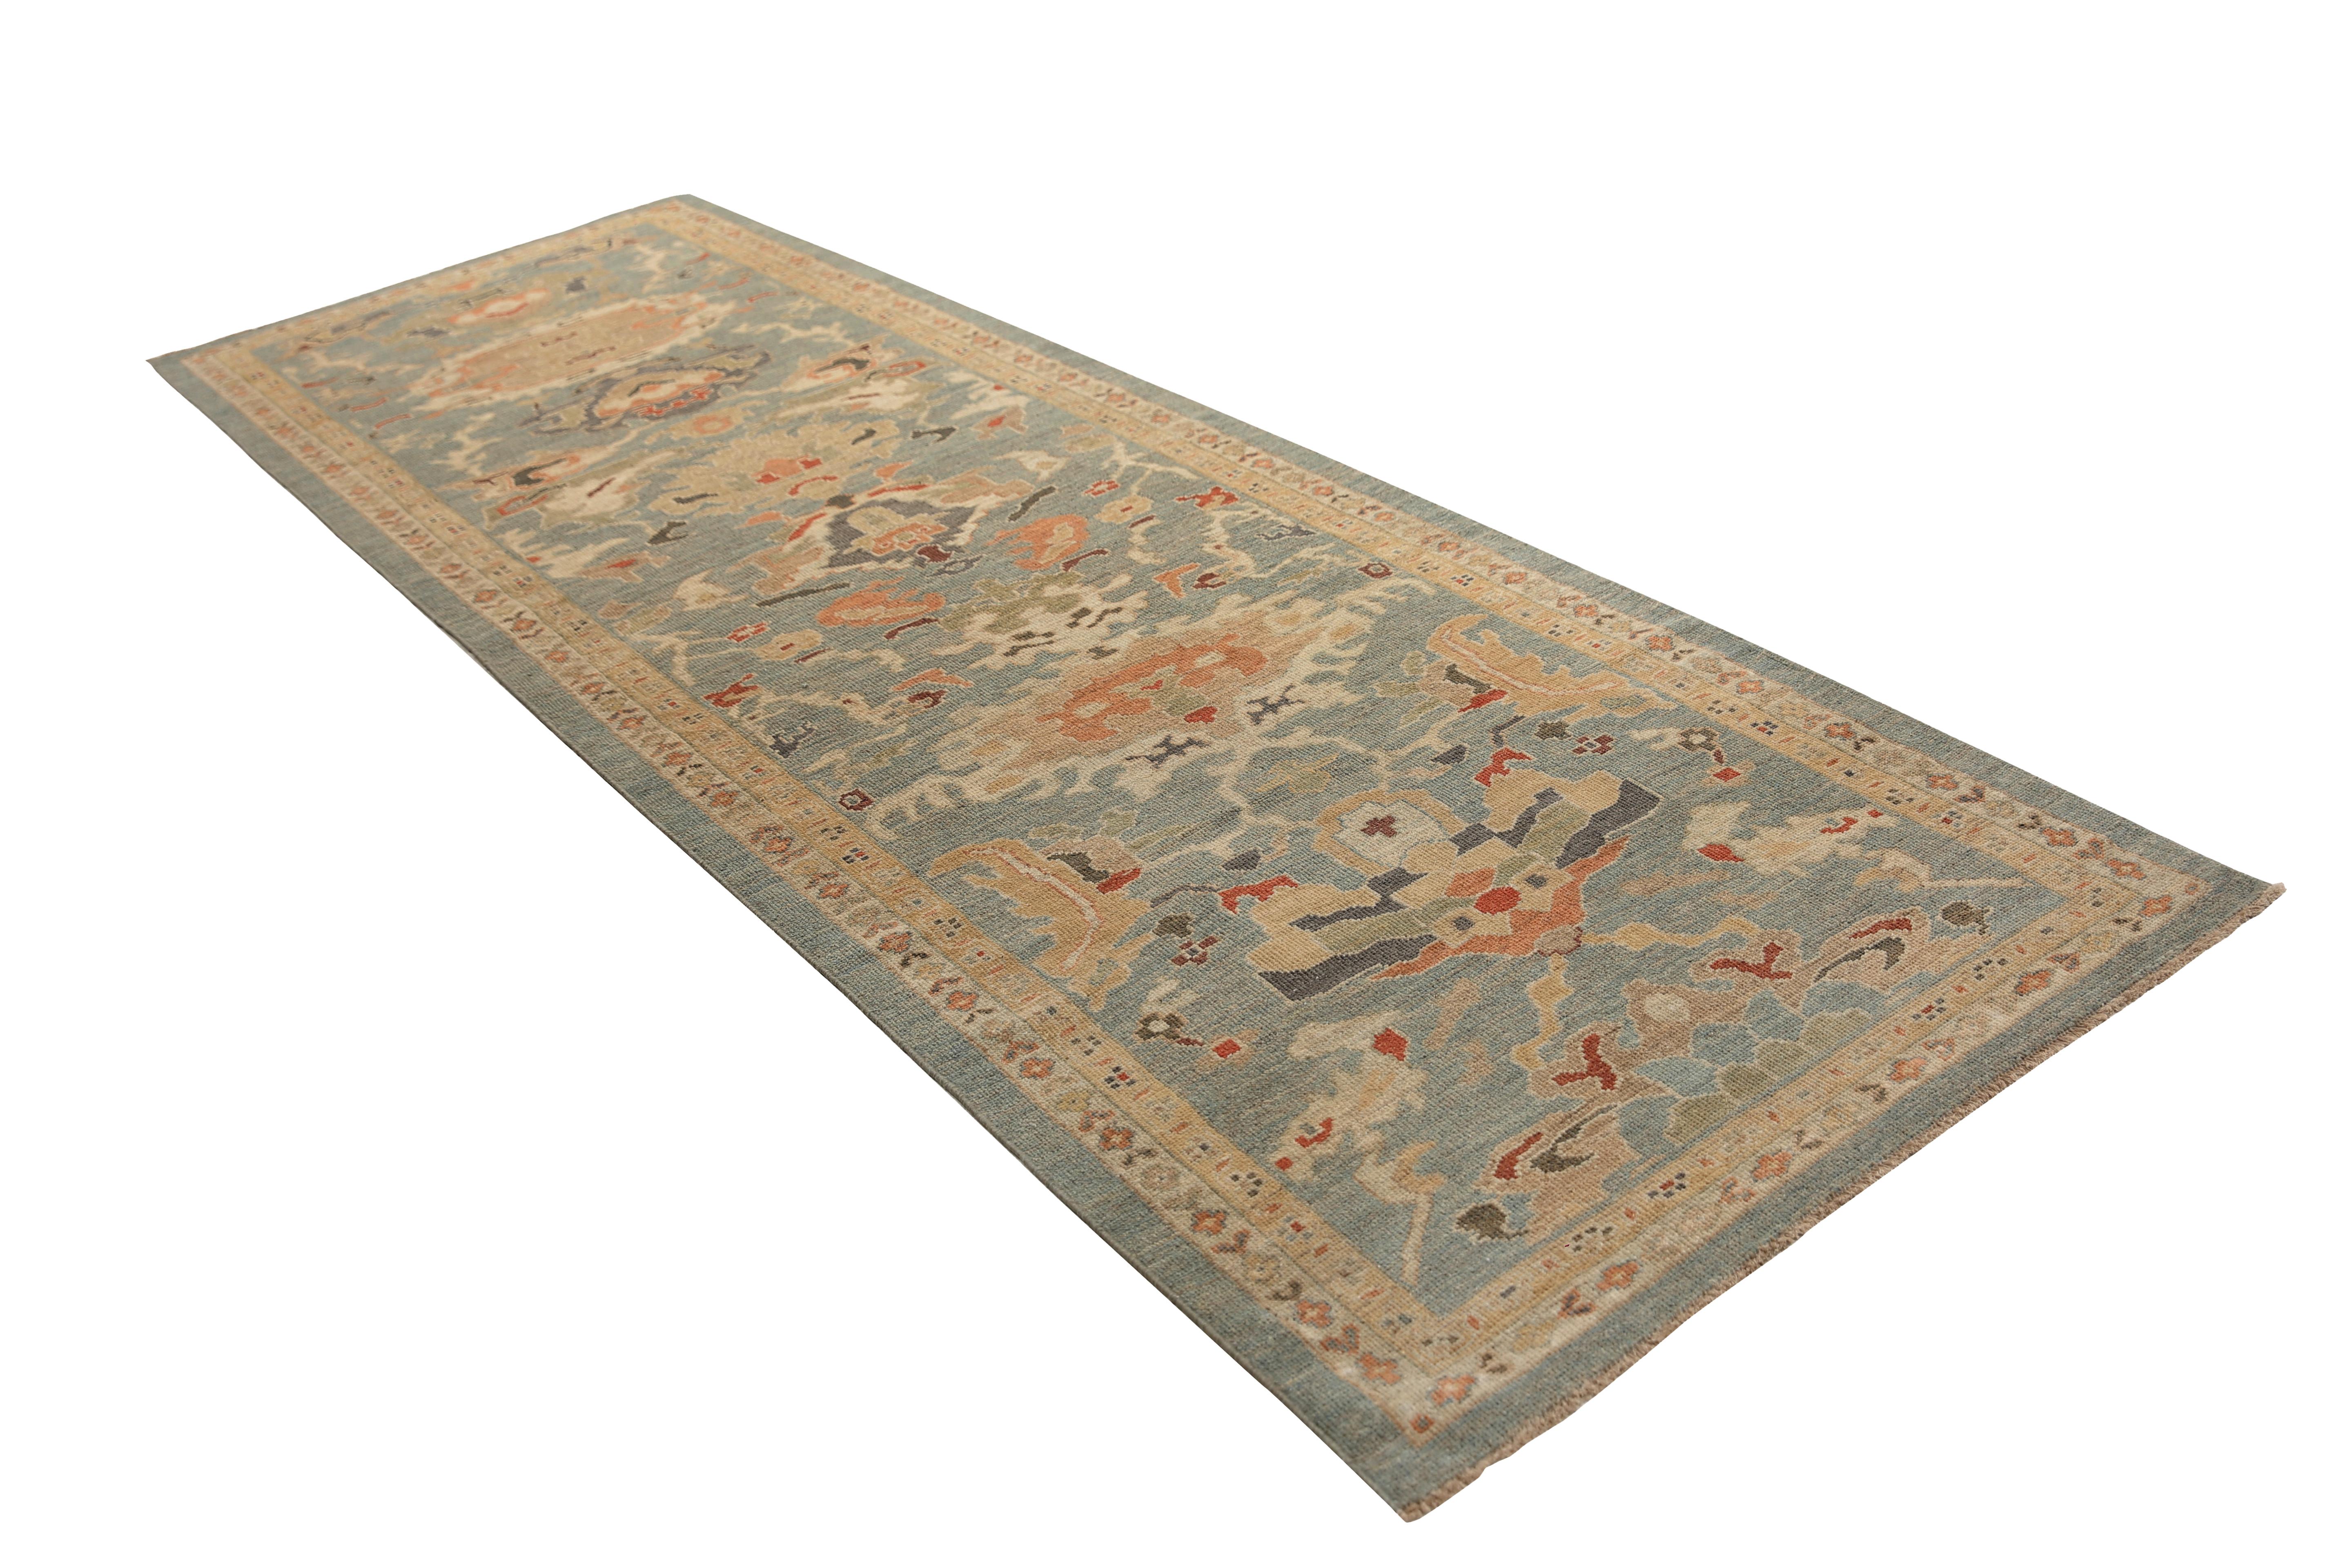 Introducing our stunning handmade Sultanabad runner rug, straight from Turkey! With a beautiful blue/teal background and a distinct border, this rug is sure to impress. The transitional design includes a lovely mix of colors such as blue, orange,